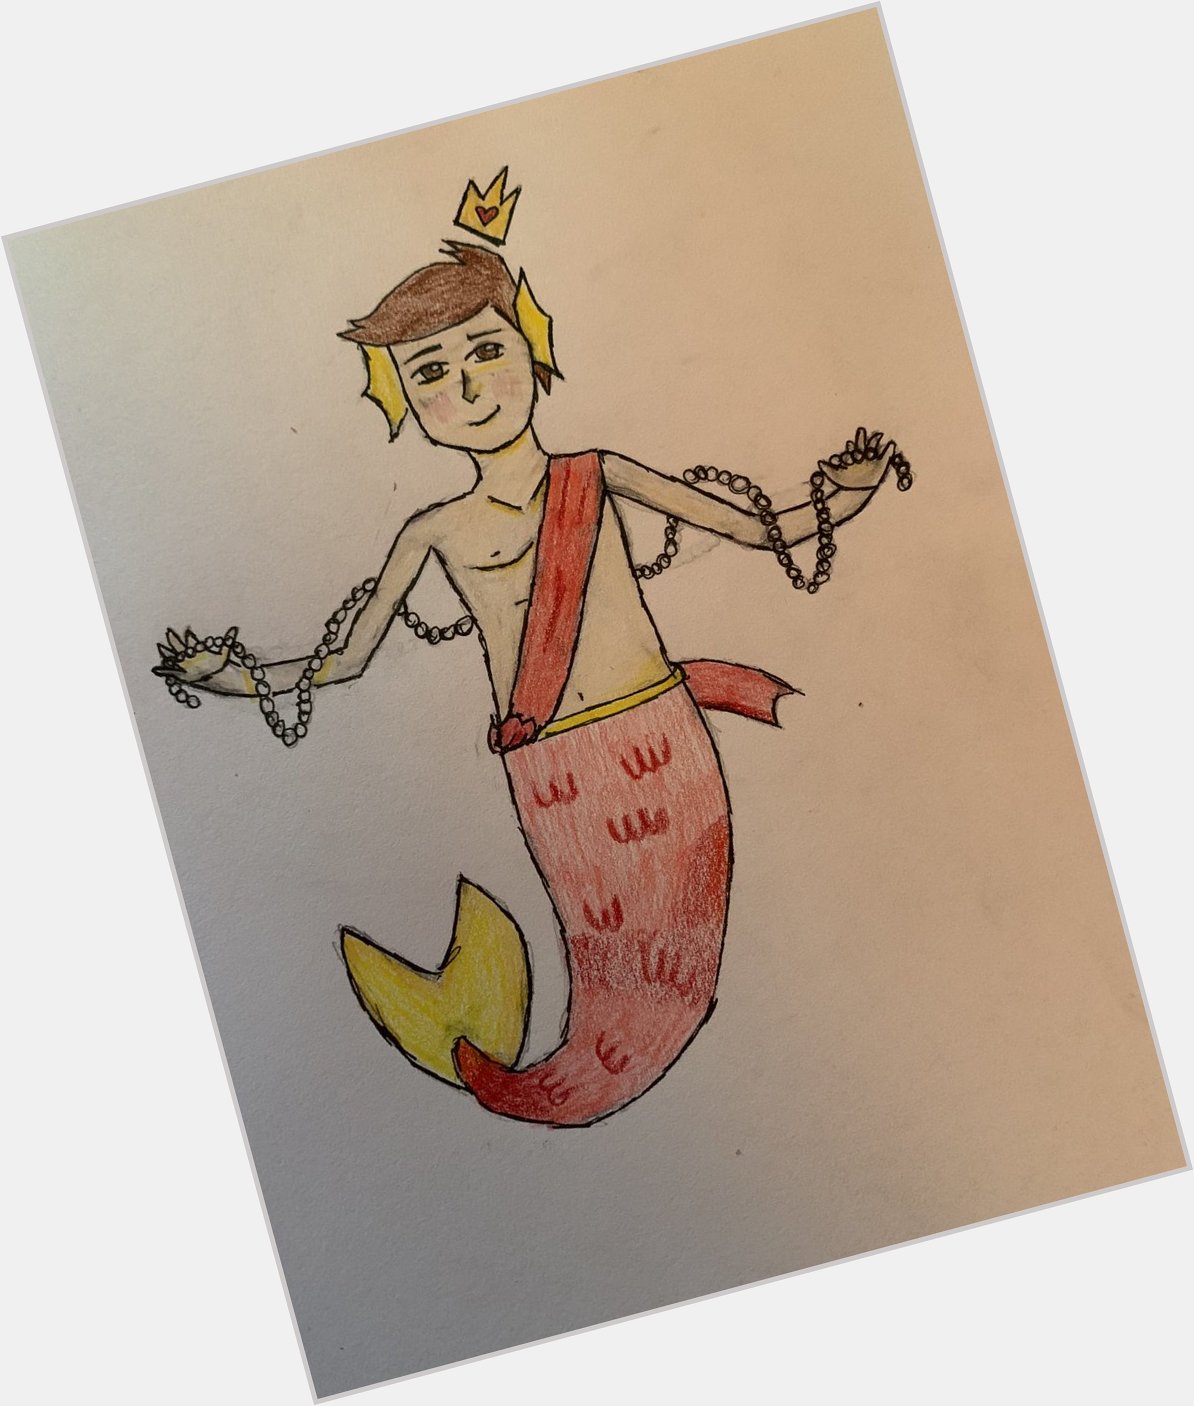 Happy (late) birthday to our favorite gay prince! I drew him as a mermaid hope u like it! 